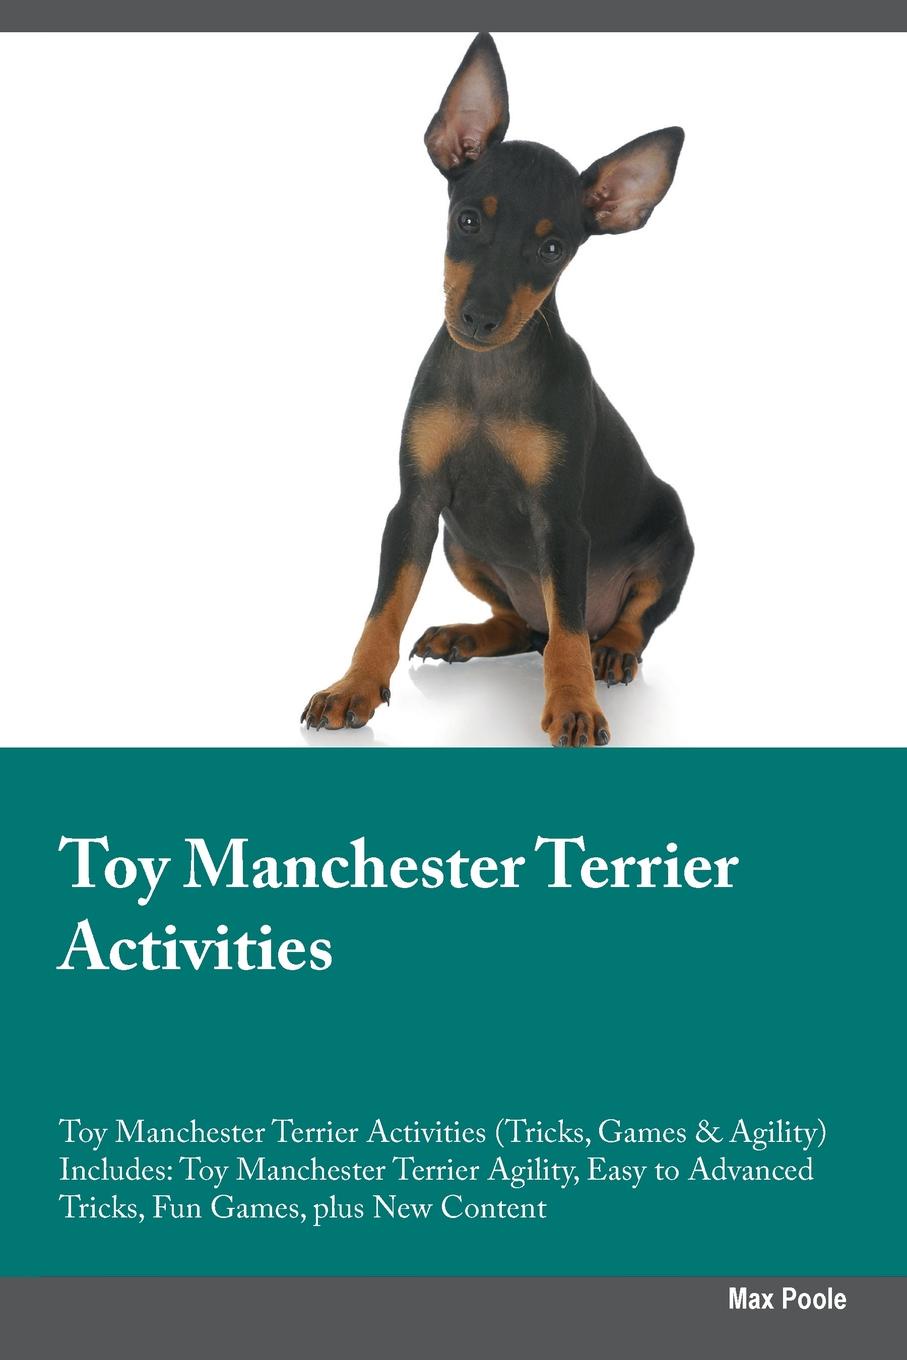 Toy Manchester Terrier Activities Toy Manchester Terrier Activities (Tricks, Games & Agility) Includes. Toy Manchester Terrier Agility, Easy to Advanced Tricks, Fun Games, plus New Content